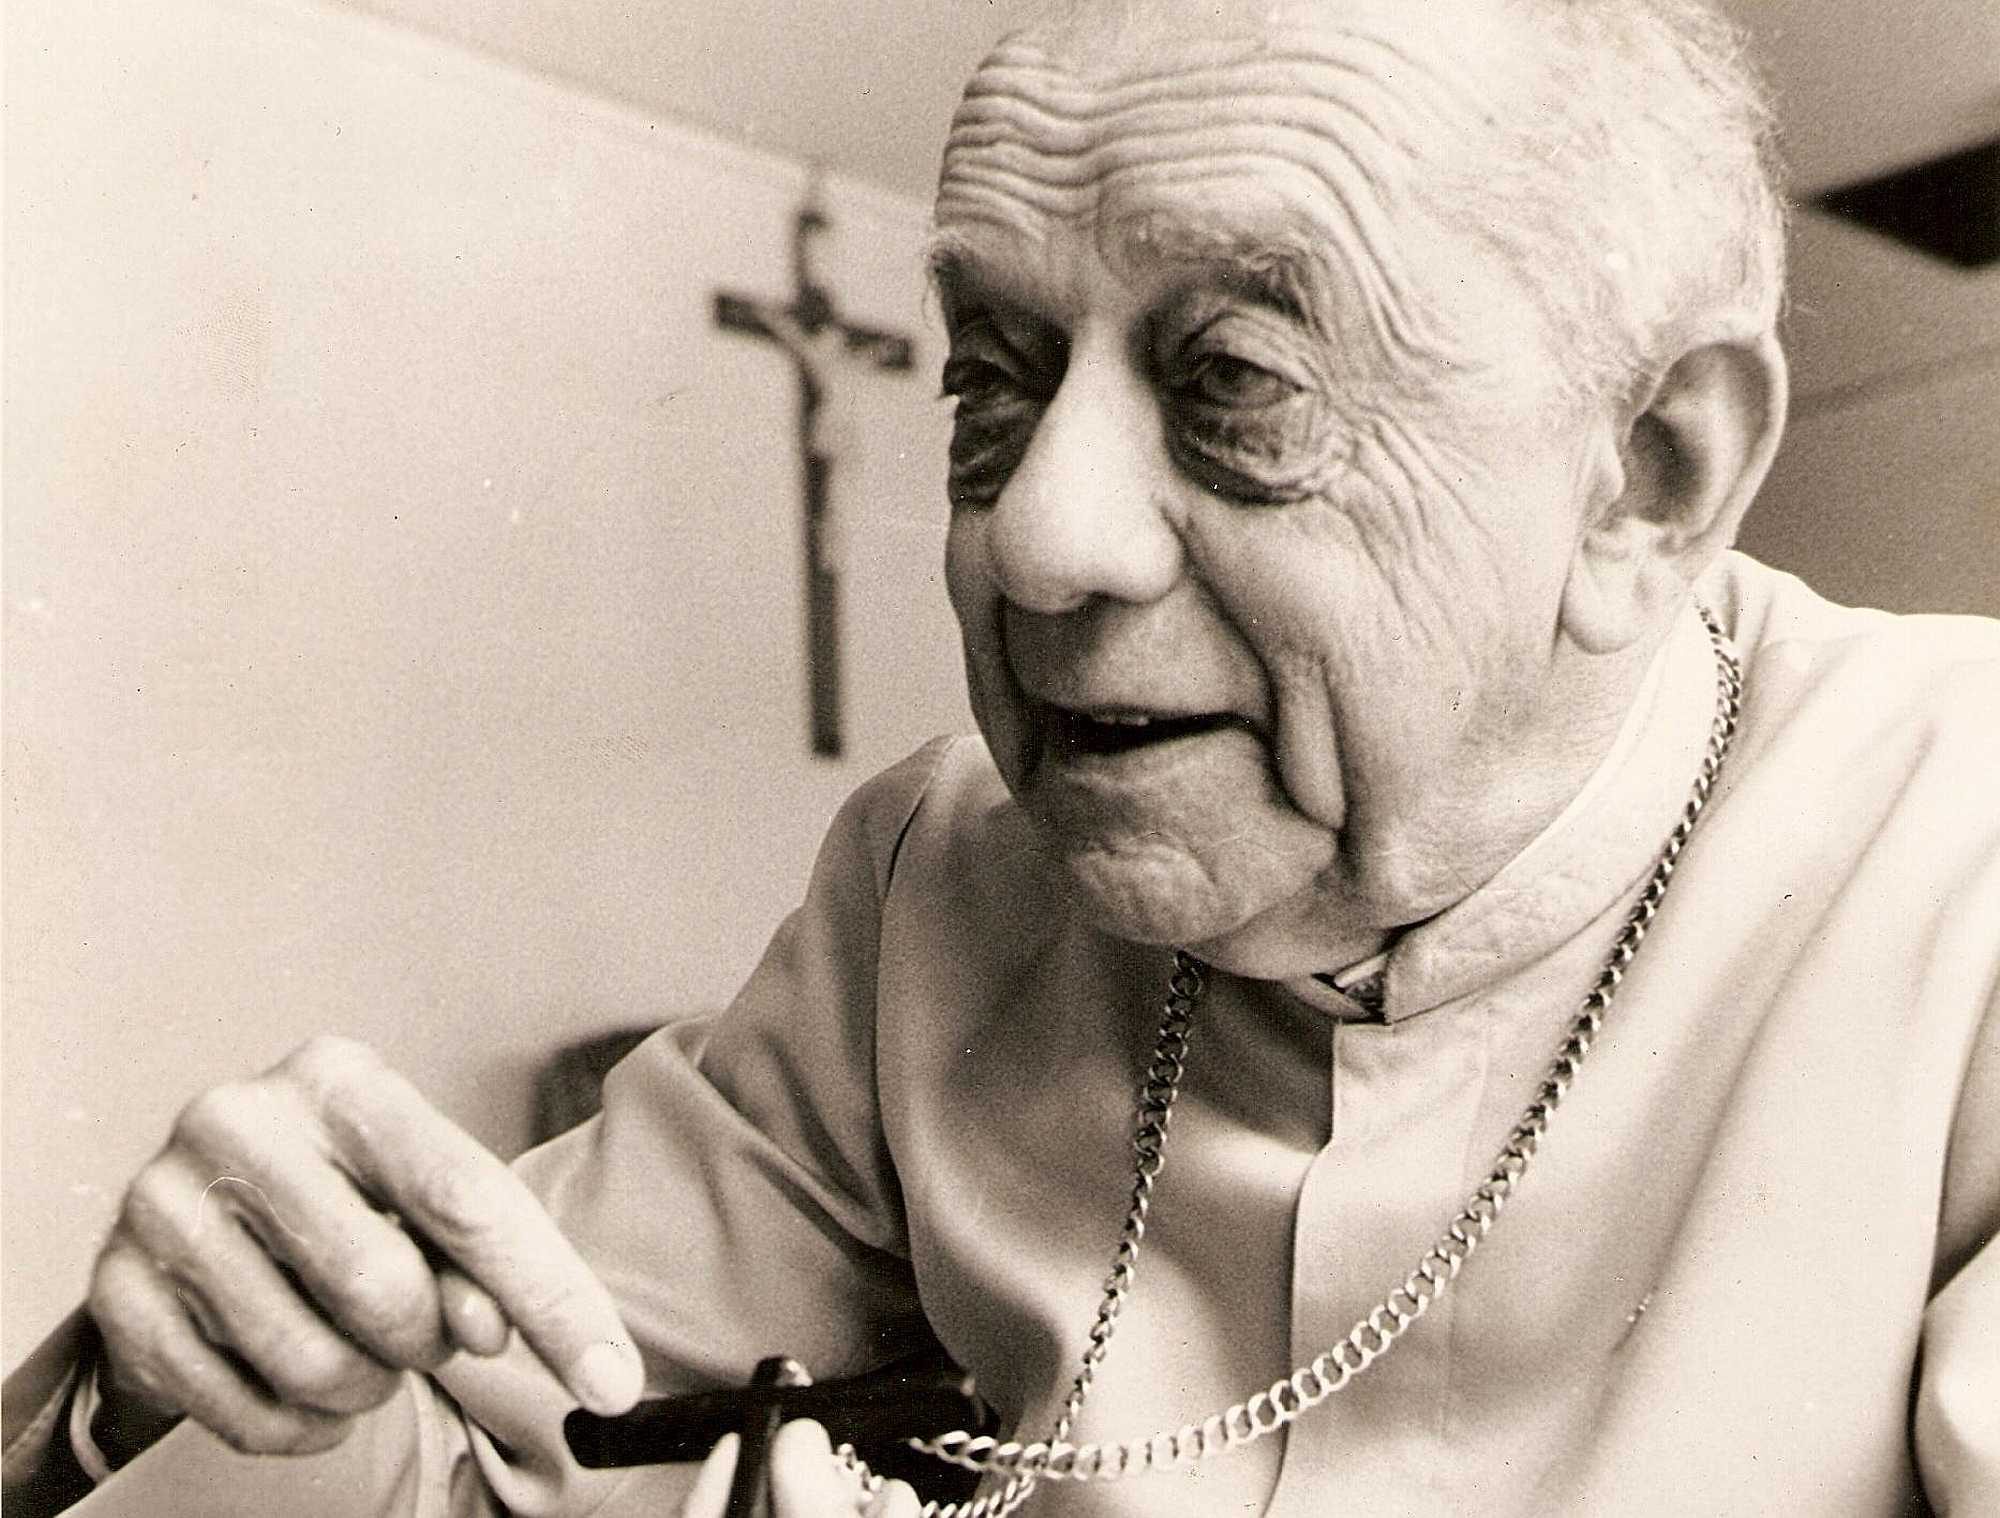 Dom Hélder Pessoa Câmara, who died in 1999, was an advocate for Liberation Theology. He was the Archbishop of Olinda and Recife